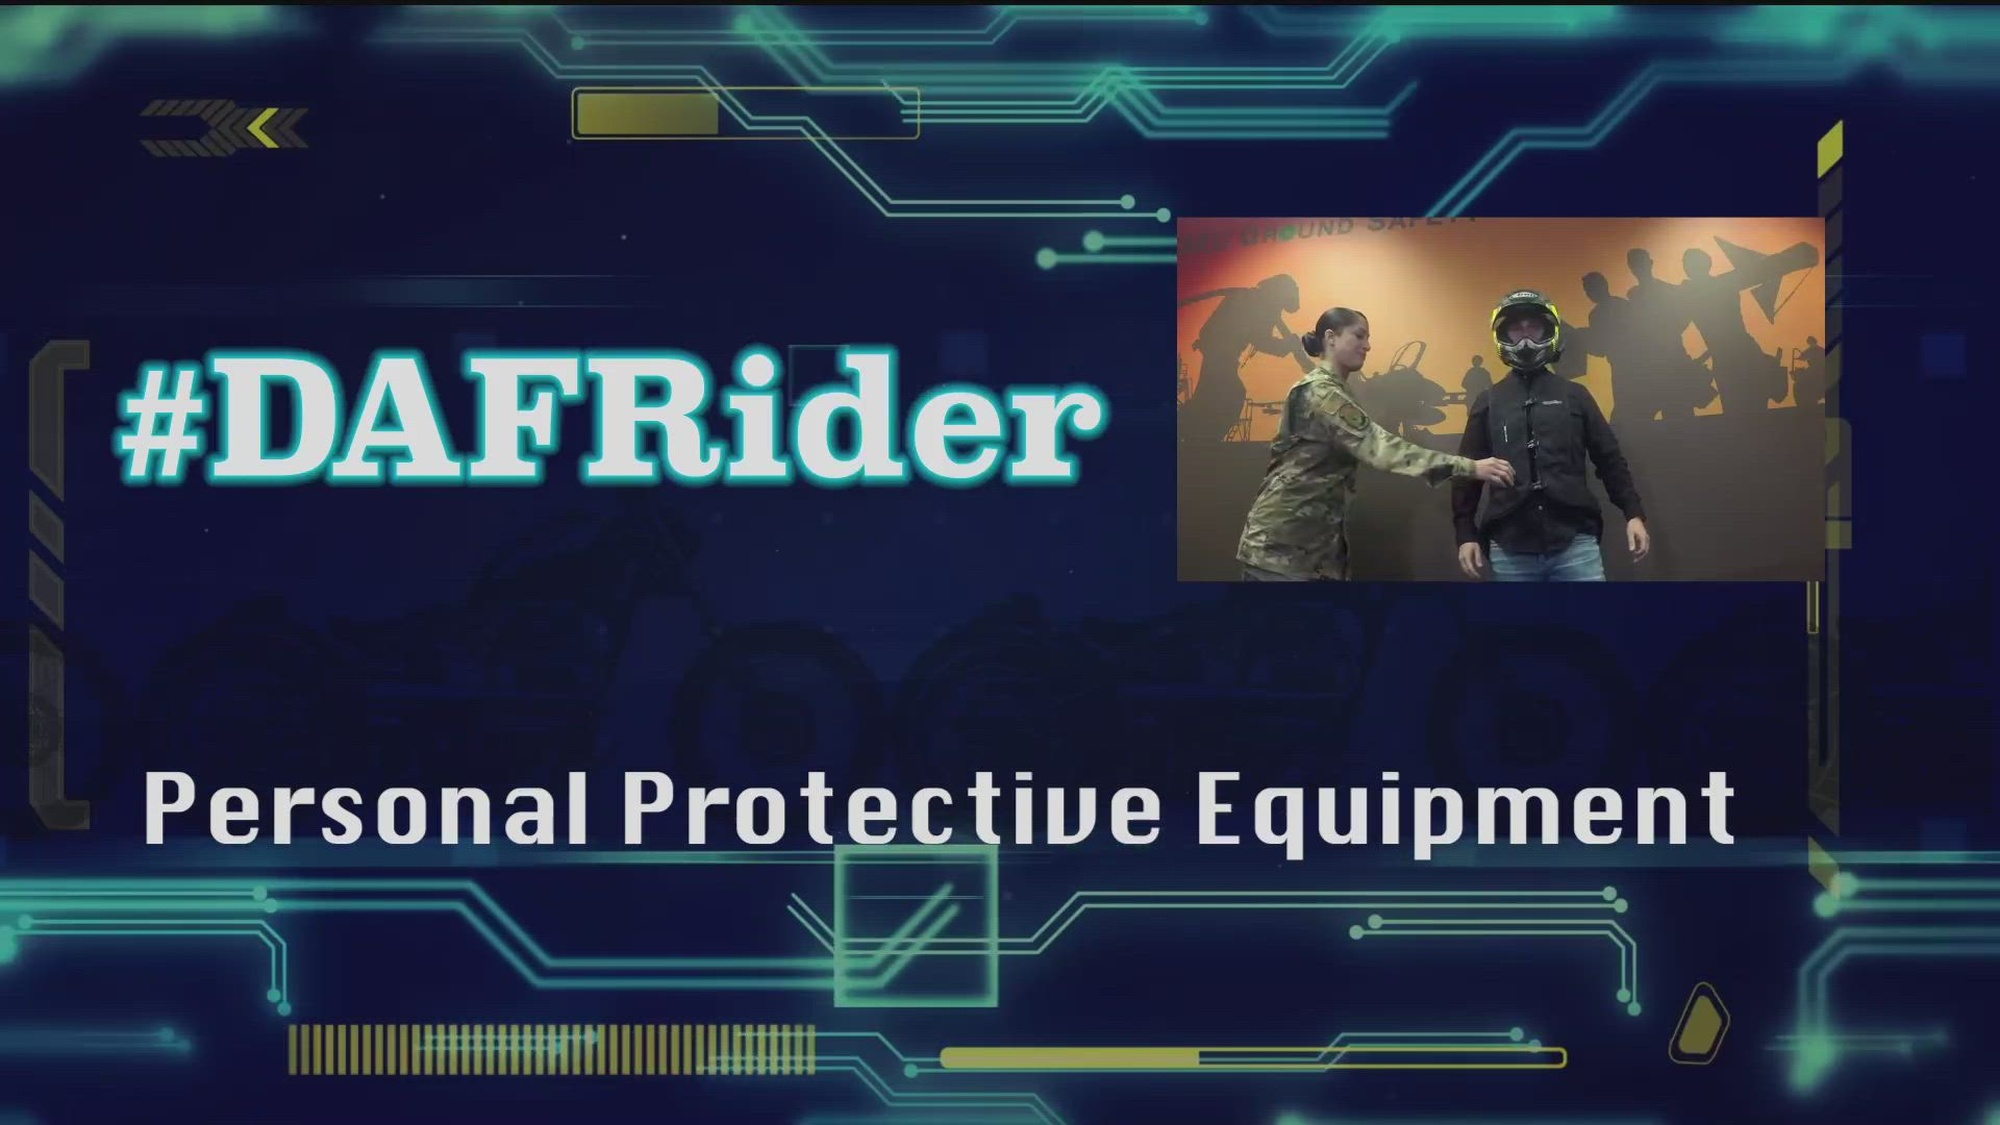 Dave Brandt talks to Eric Petau, Kirkland AFB, Lead Motorcycle Ridercoach trainer about personal protective equipment and how important it is to wear it while riding.